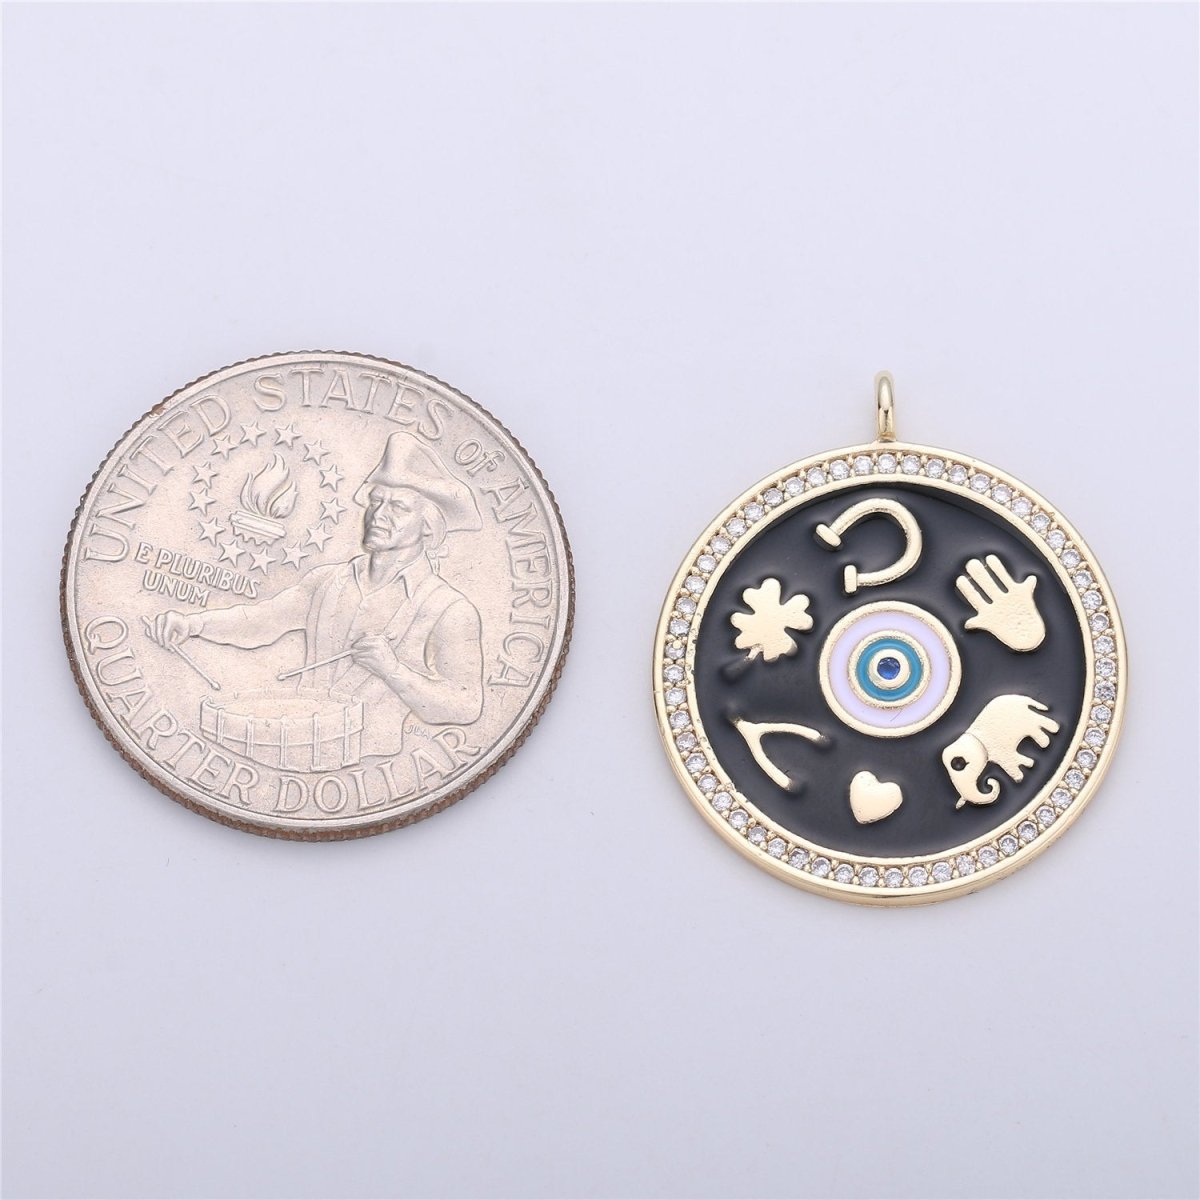 Black White Enamel Talisman Charm Necklace, Gold Filled Coin Round Pendant Lucky Medallion Pendant for Necklace Jewelry Making Supply C-688 - DLUXCA